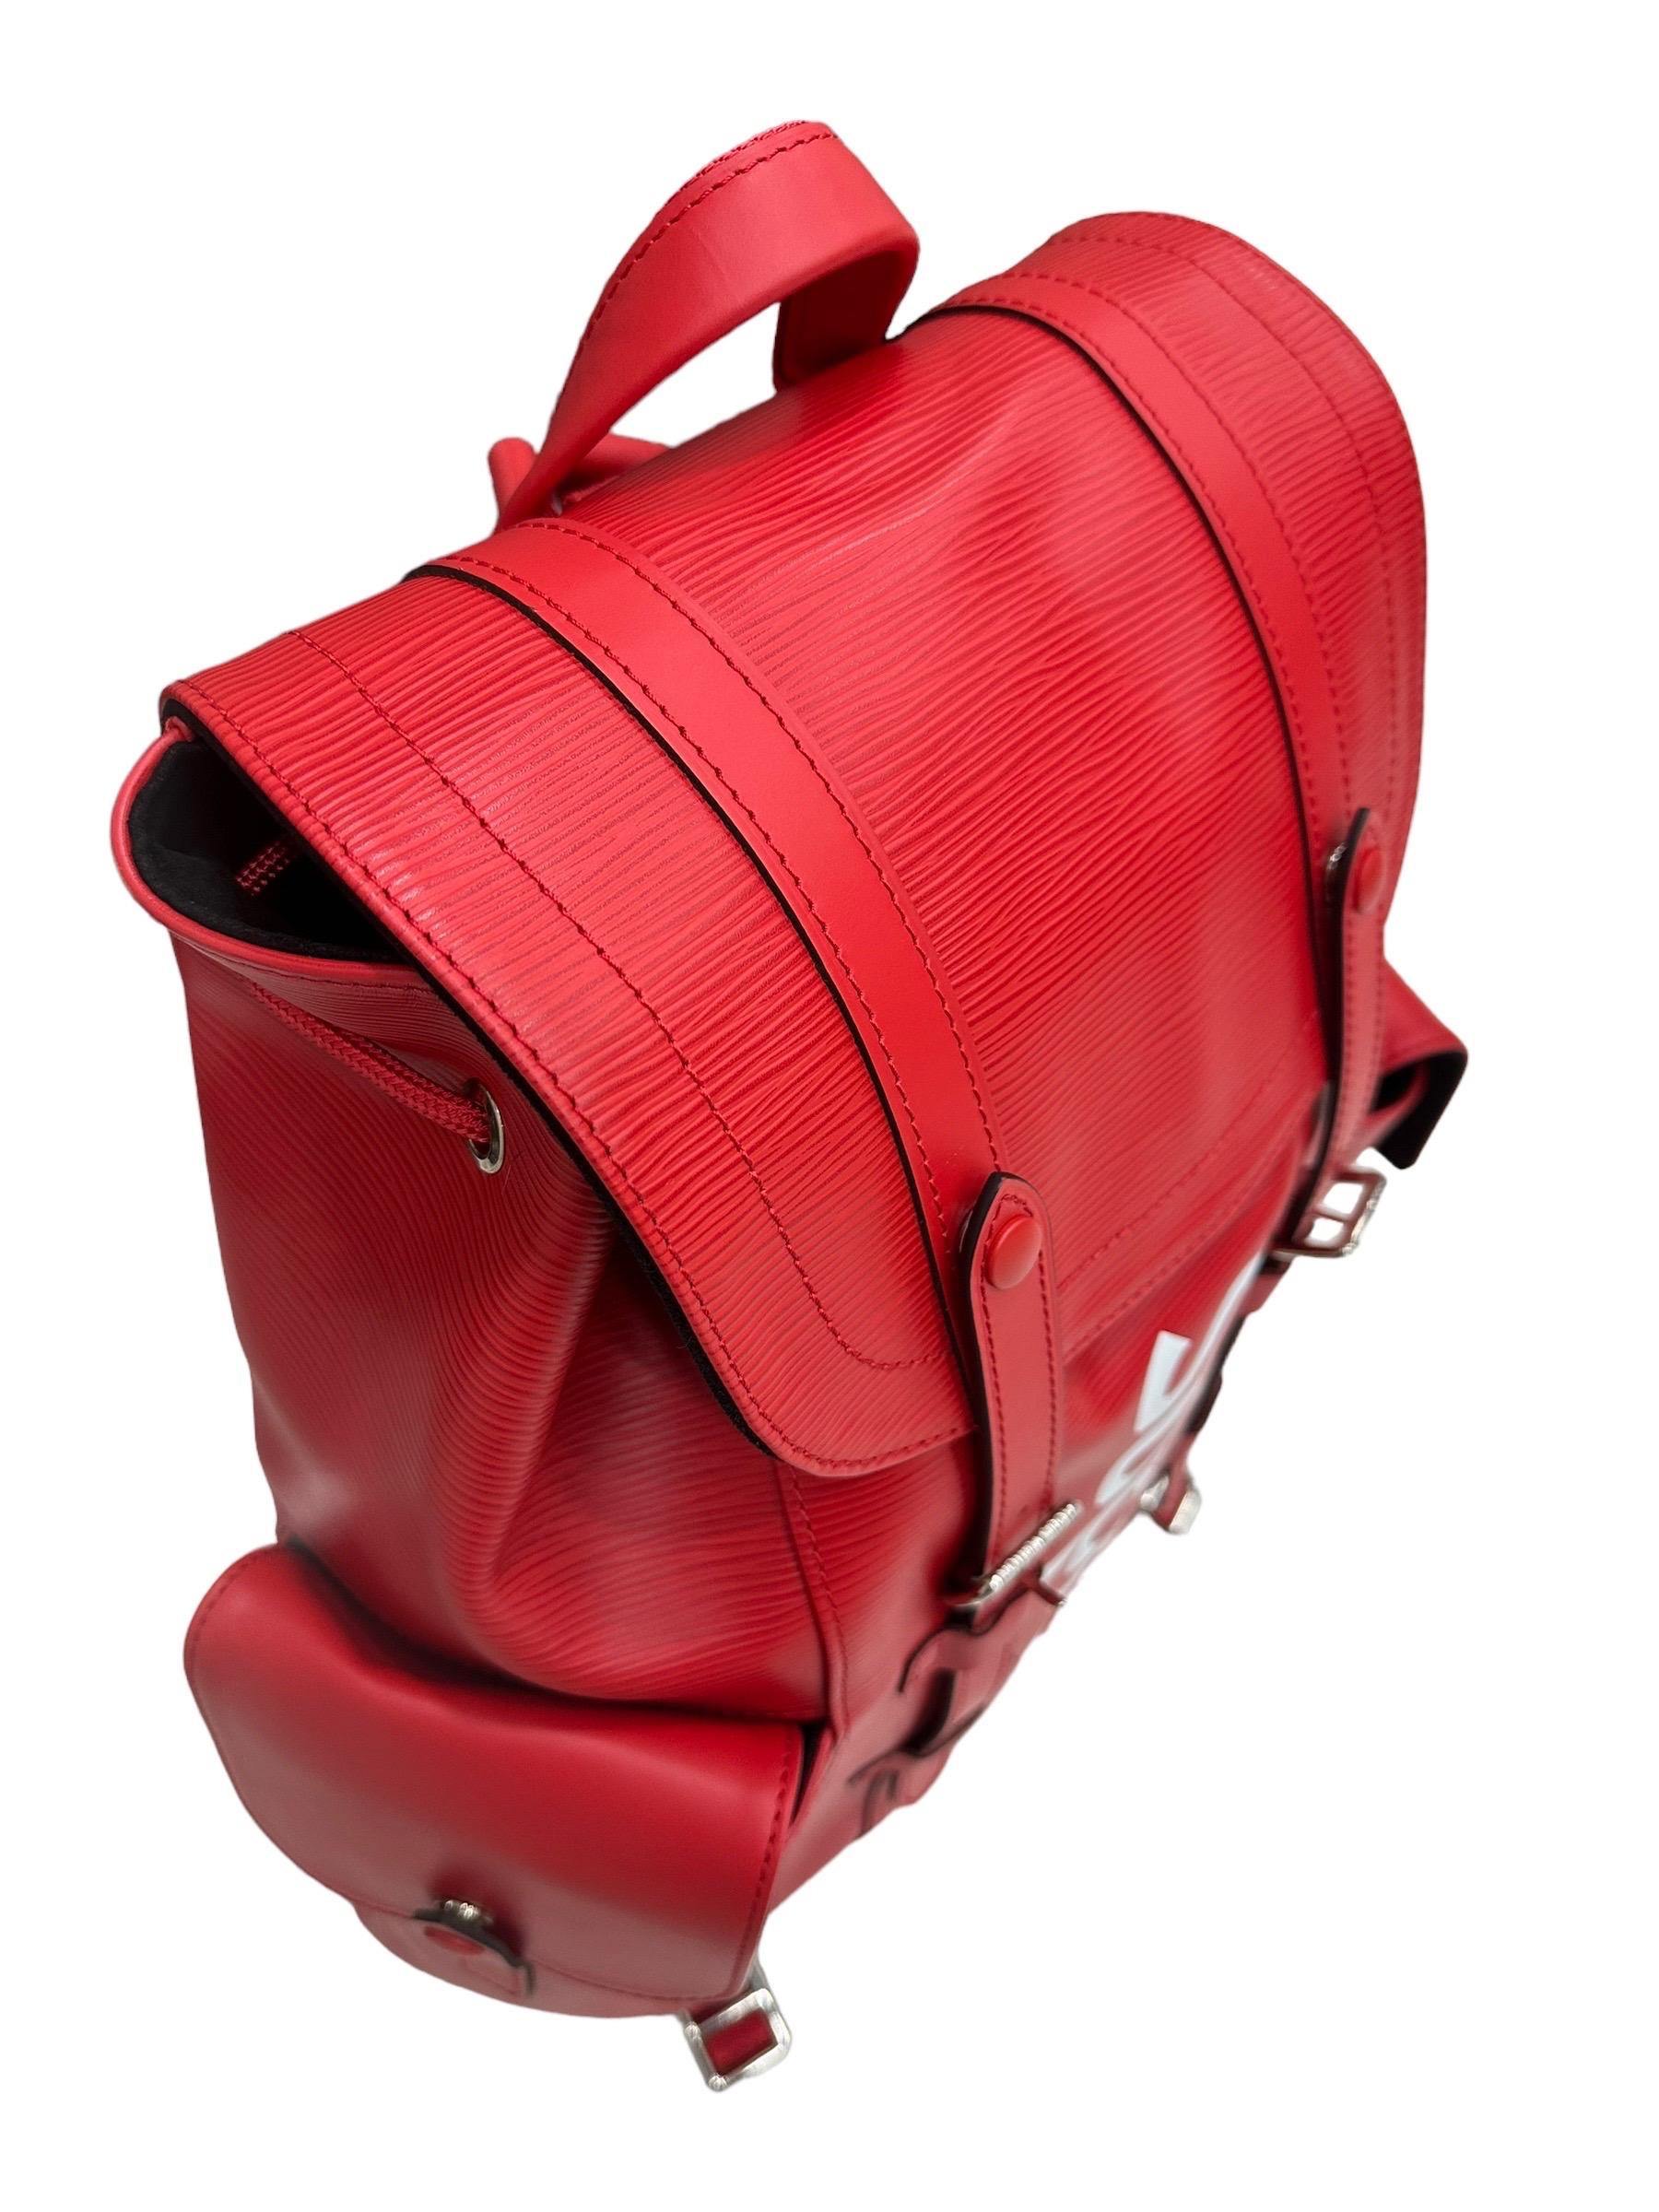 

Louis Vuitton backpack, Christoper model, in limited edition in collaboration with Supreme. Crafted in red epi leather with white front lettering and silver hardware. Featuring a front flap with snap button closure or adjustable buckles. Equipped